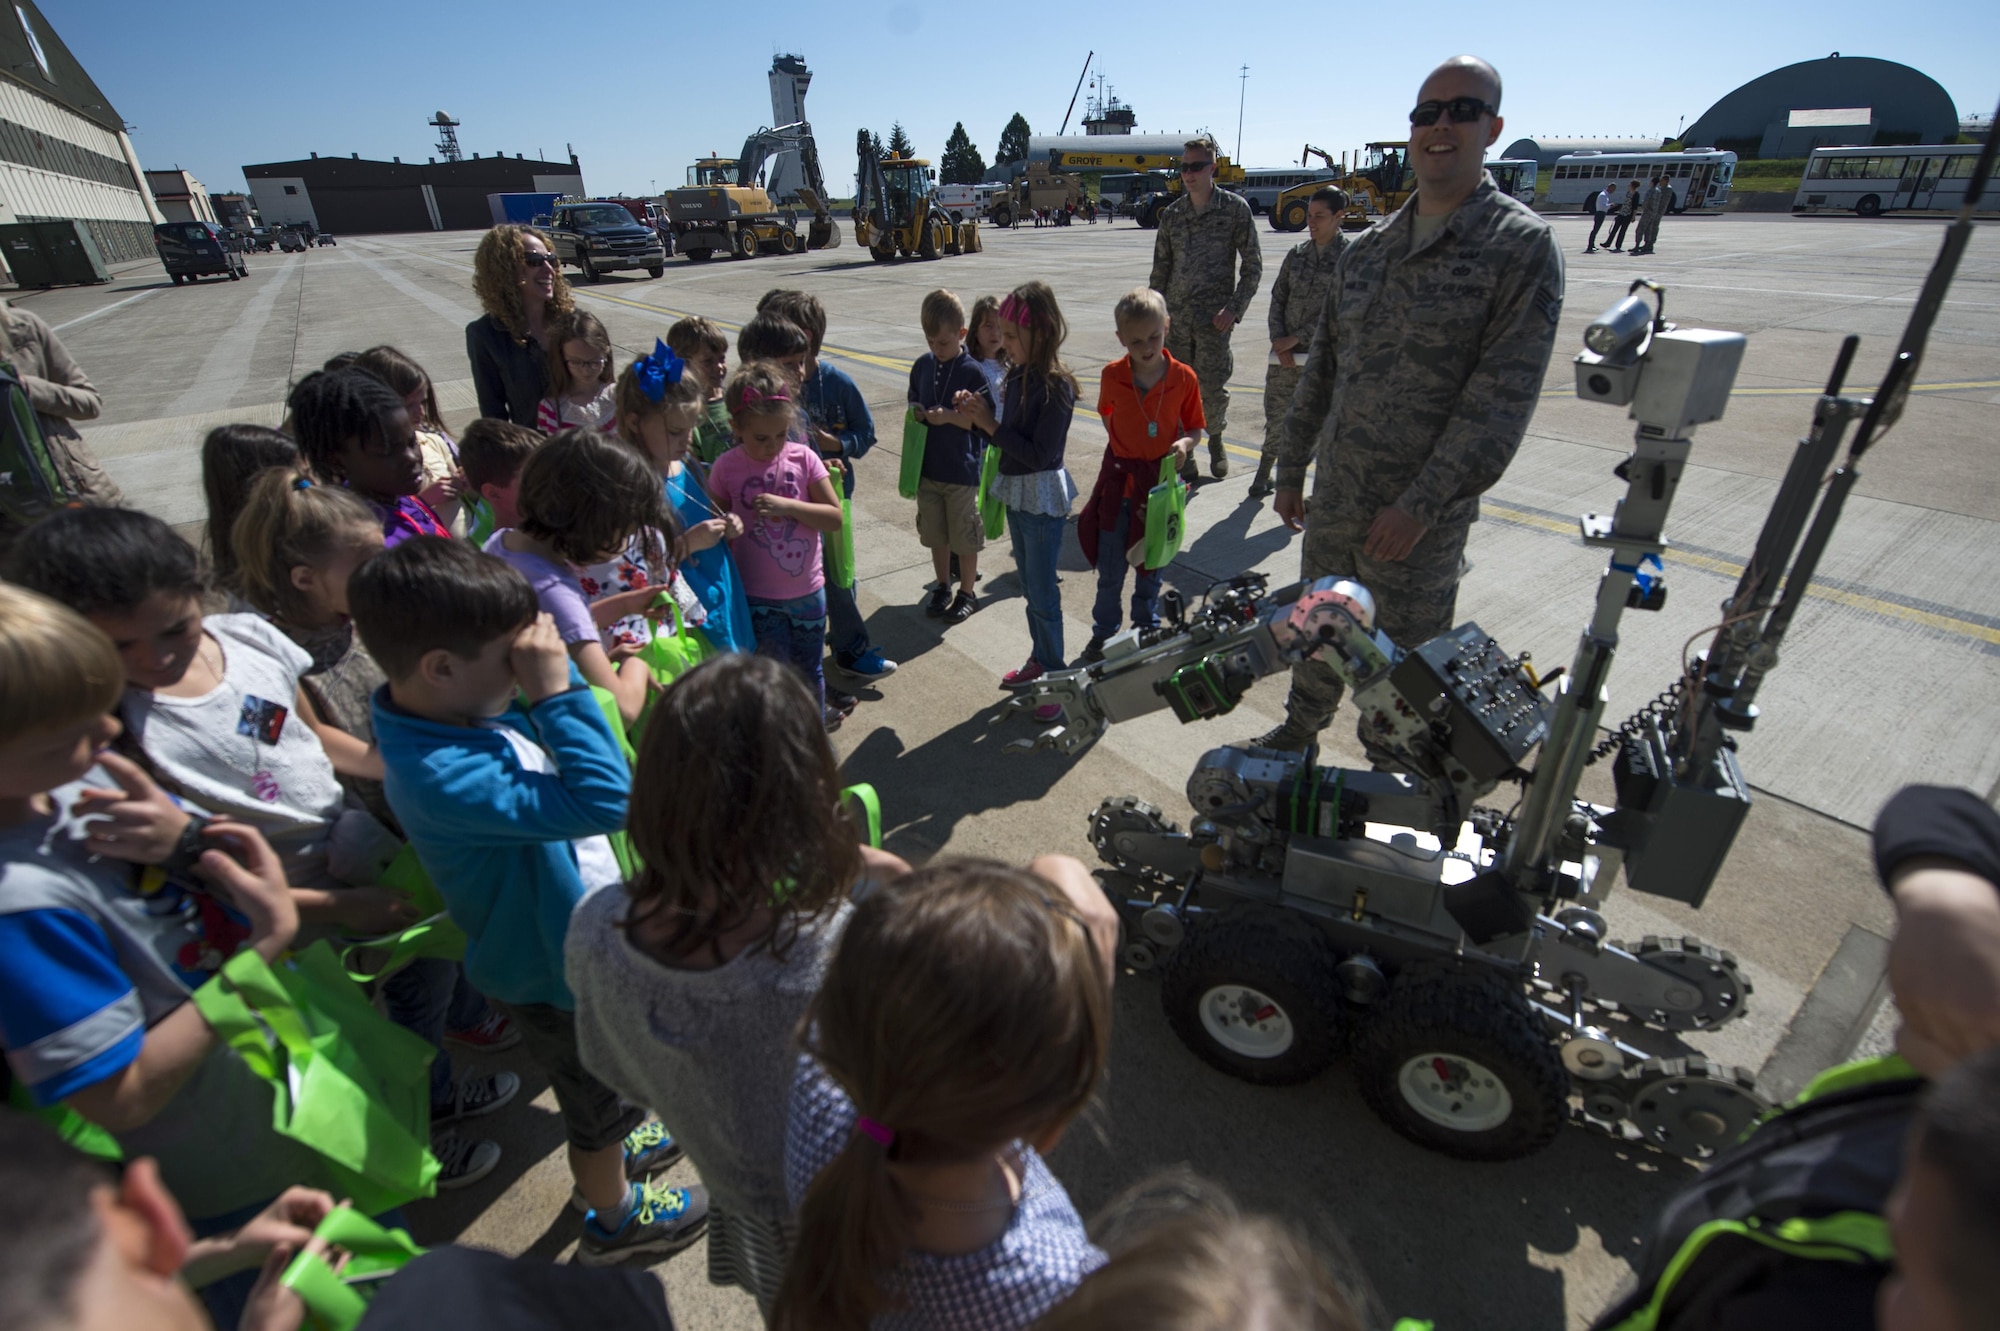 U.S. Air Force Staff Sgt. Brook Hamilton, 52nd Civil Engineer Squadron explosive ordnance disposal team member, shows children from Spangdahlem Elementary School an EOD robot during Children’s Deployment Days at Spangdahlem Air Base, Germany, May 22, 2017. The event helped children better understand a deployment and included a pre-deployment brief, individual protective equipment station and multiple static displays for children to learn about. (U.S. Air Force photo by Airman 1st Class Preston Cherry)